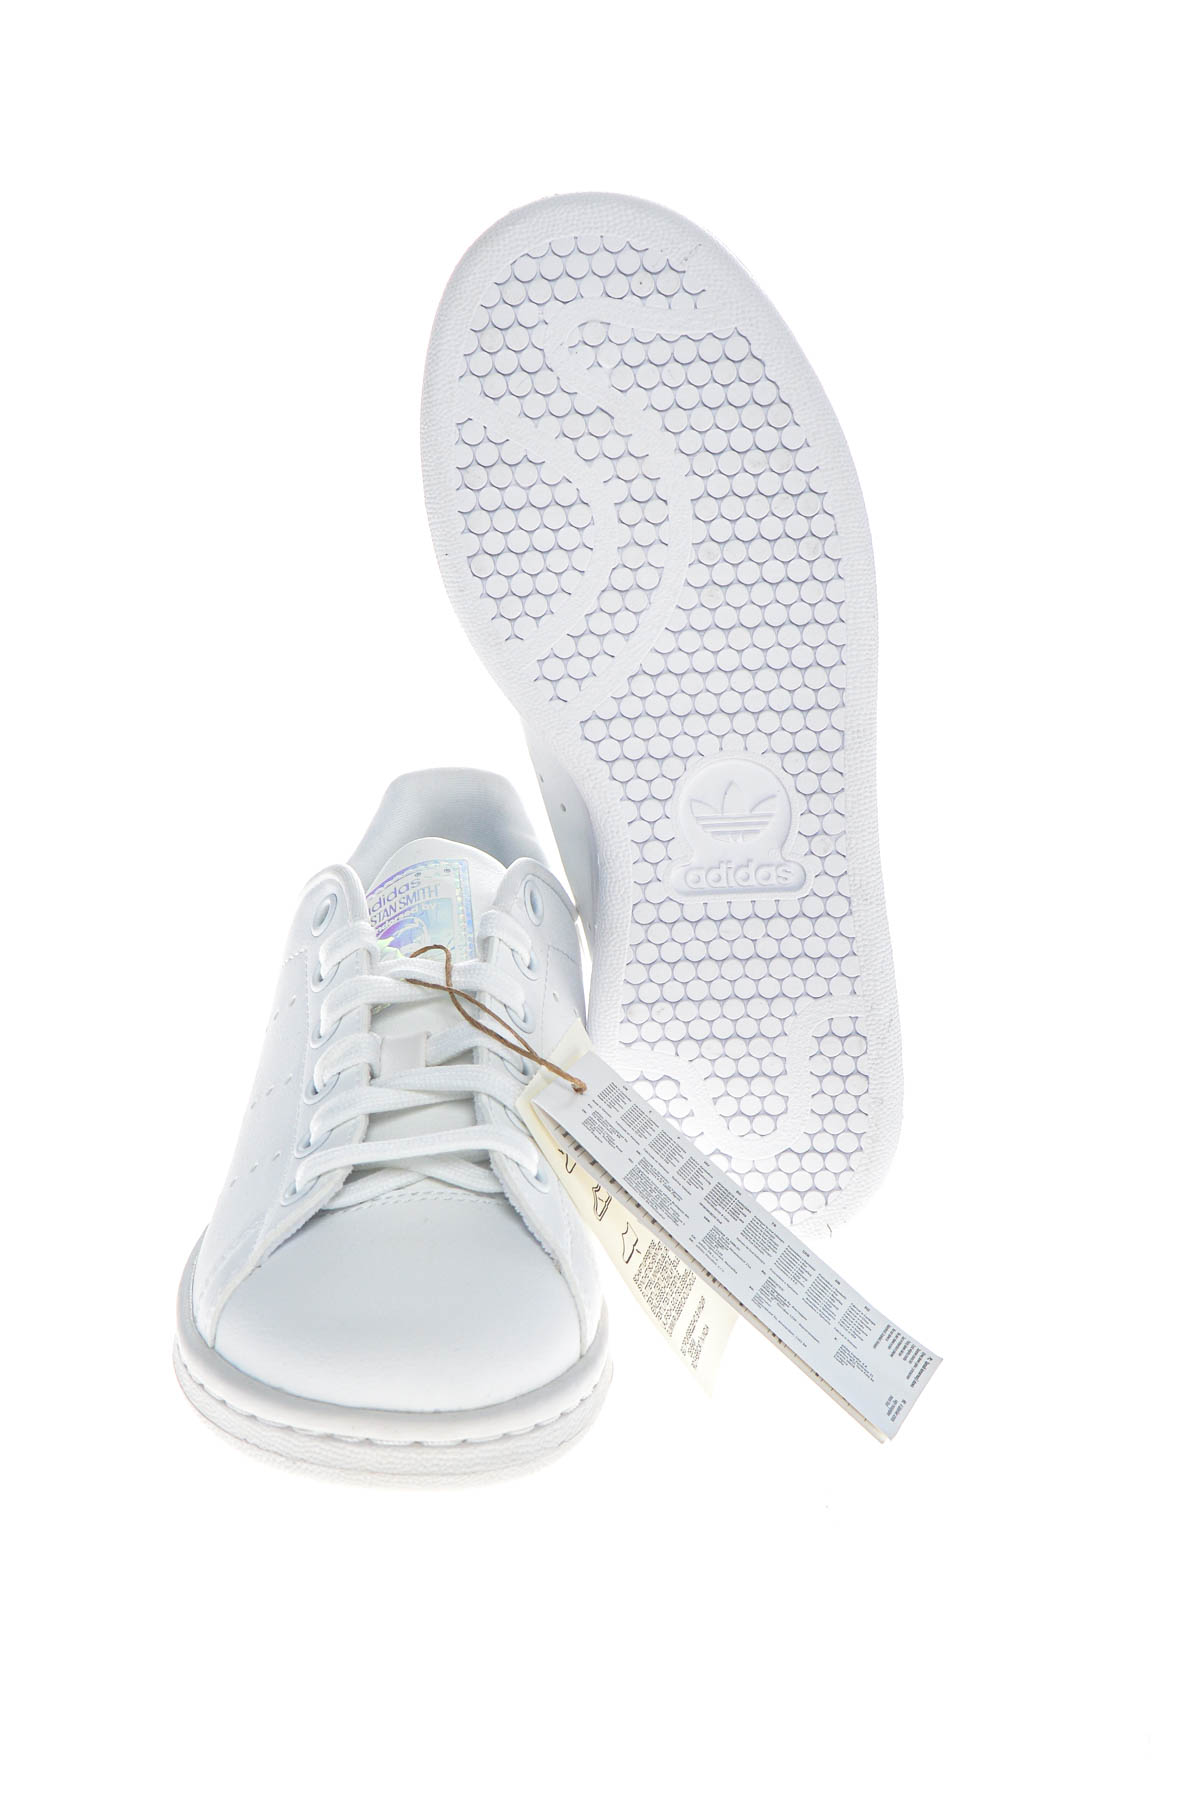 Girl's shoes - Stan Smith x Adidas - 3